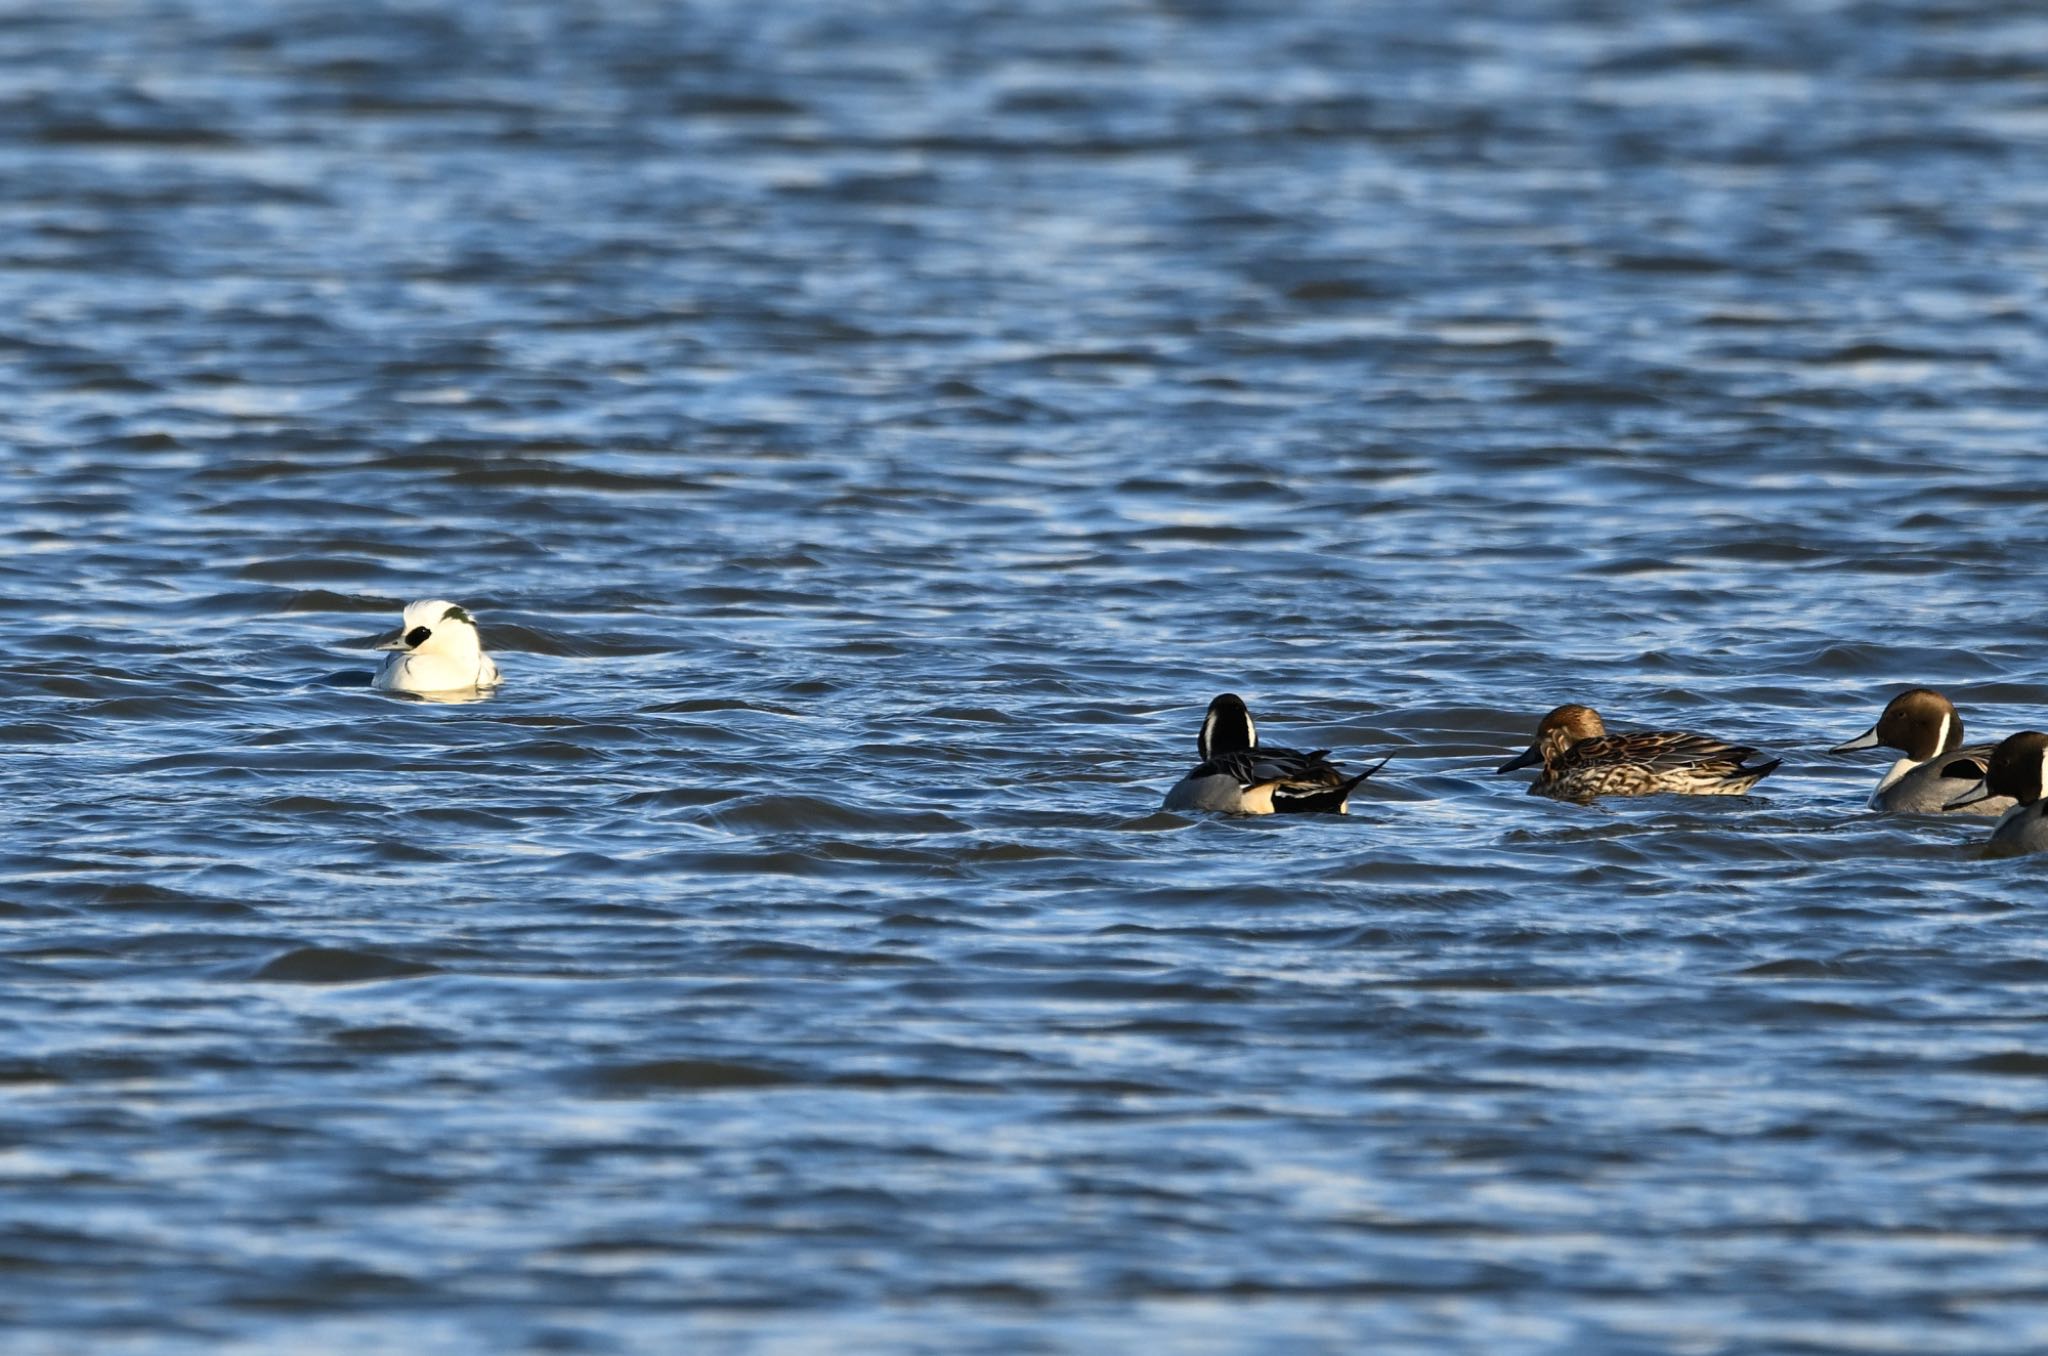 Photo of Northern Pintail at こちらも難を逃れた by アカウント5227